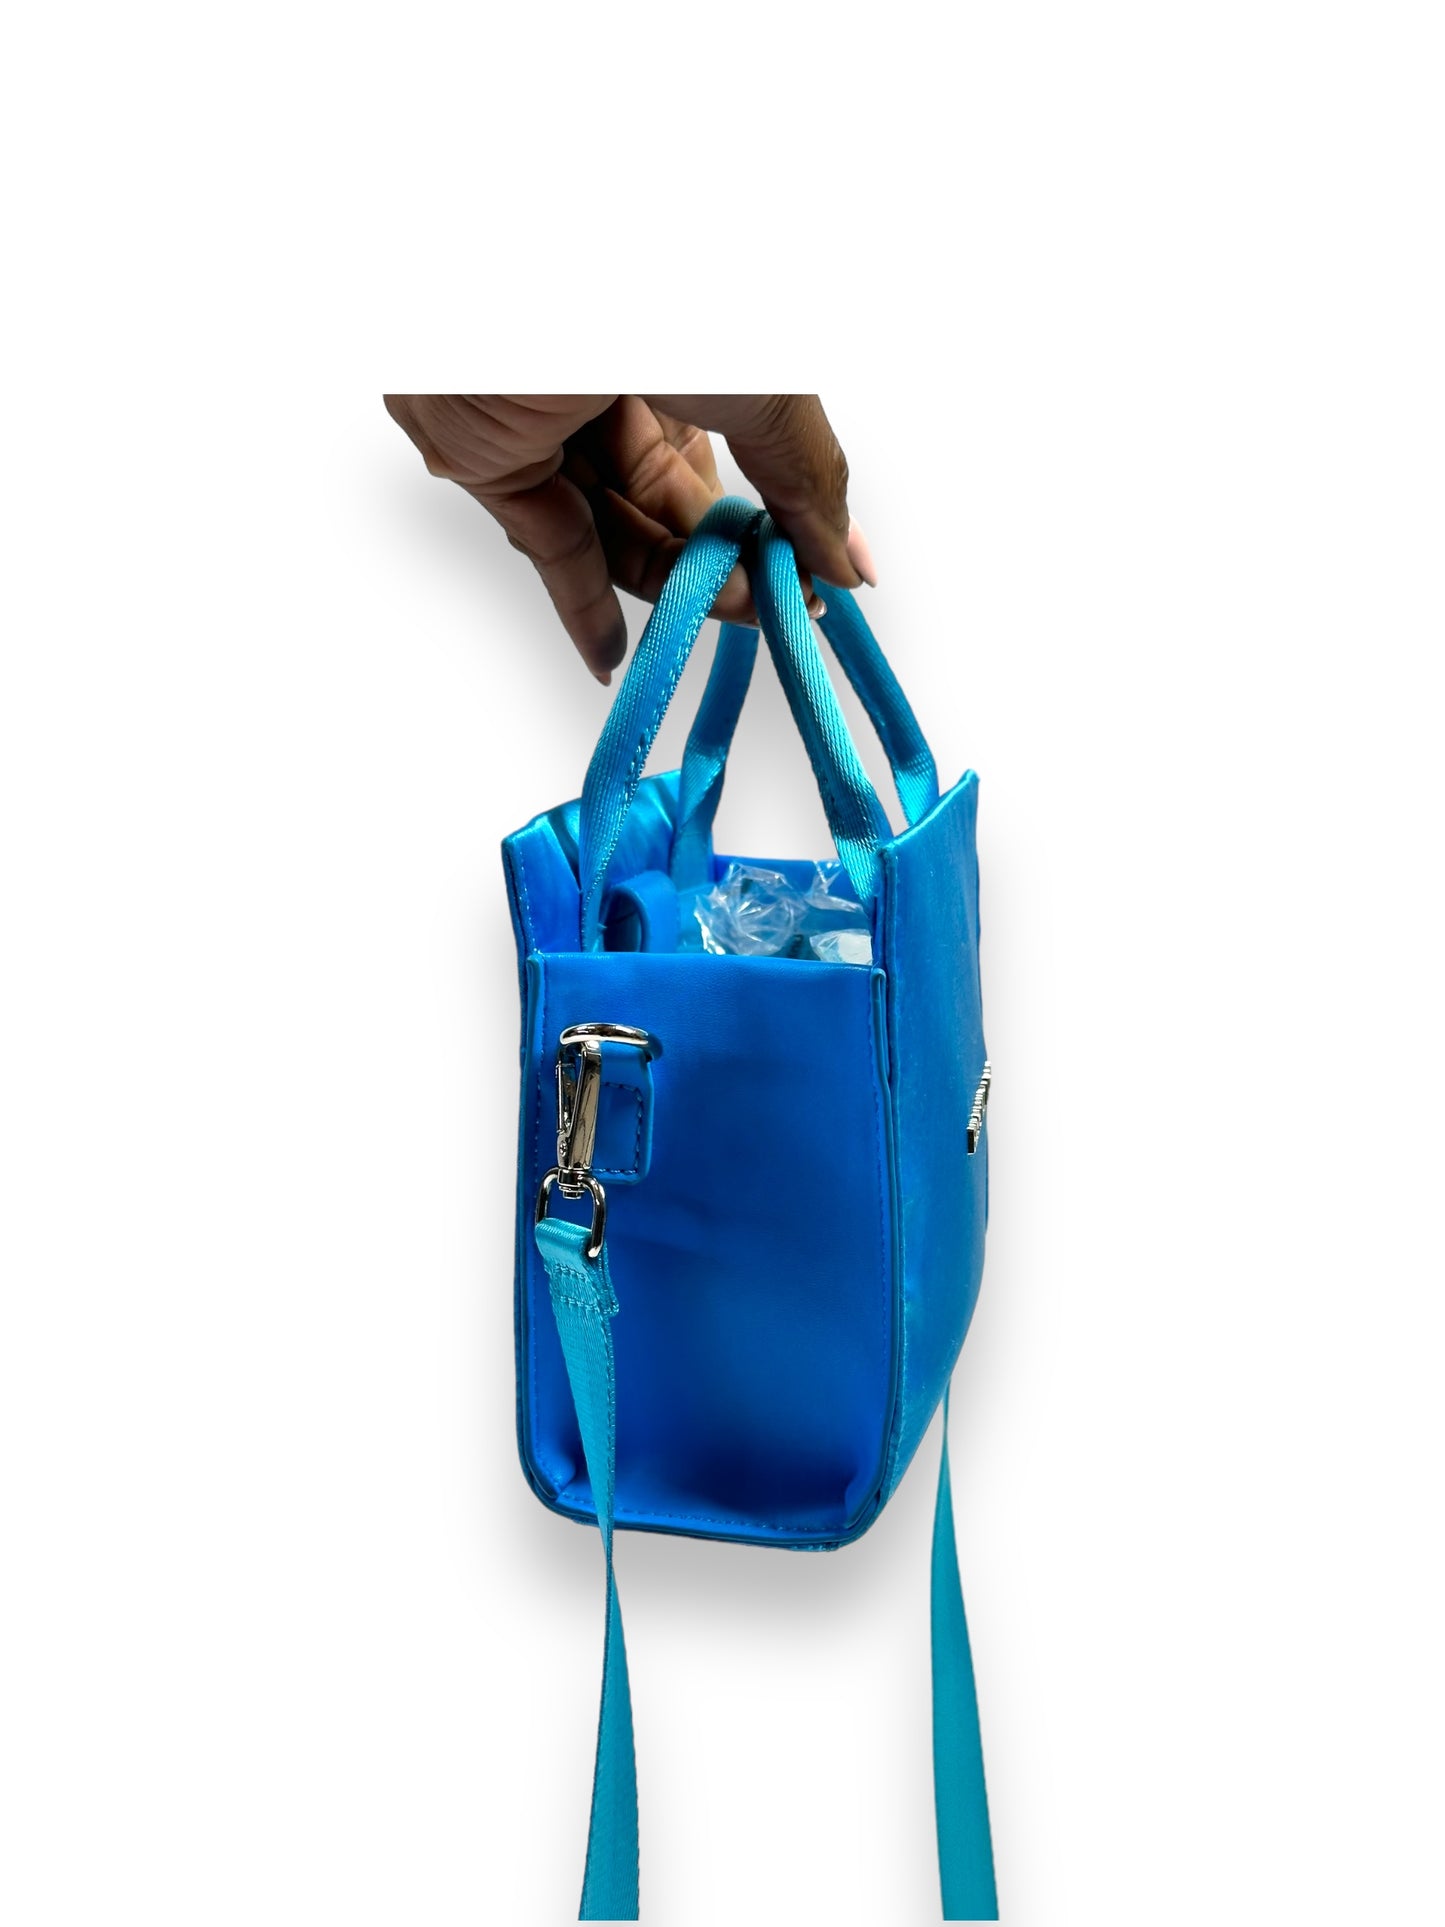 Trend: Brandon Blackwood “End Systematic Racism” Micro Bag (Blue)